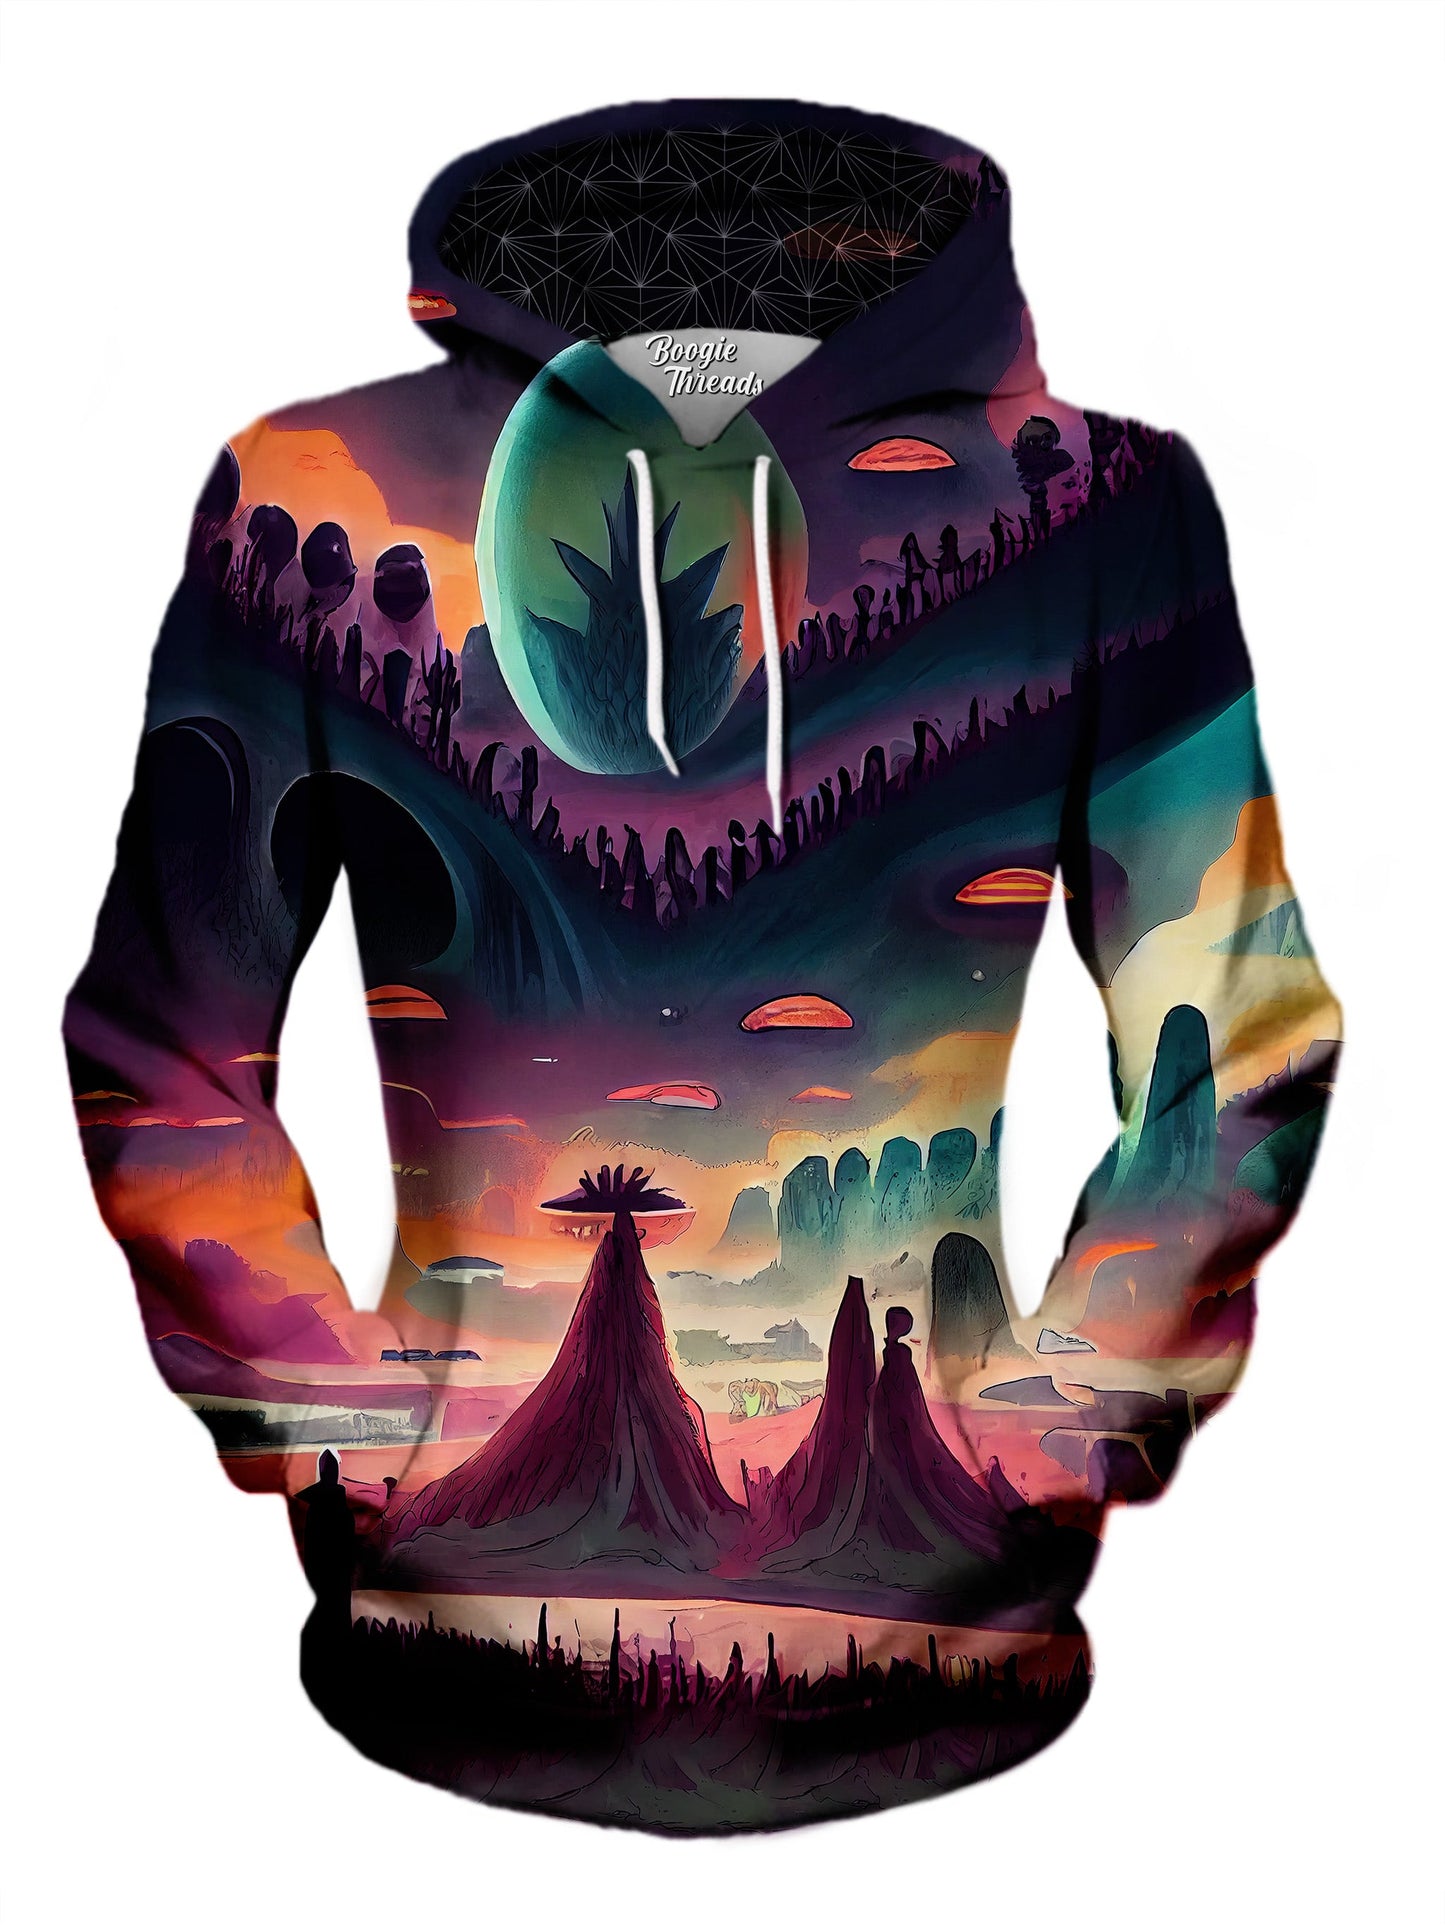 Thundering Perspective Unisex Pullover Hoodie - EDM Festival Clothing - Boogie Threads